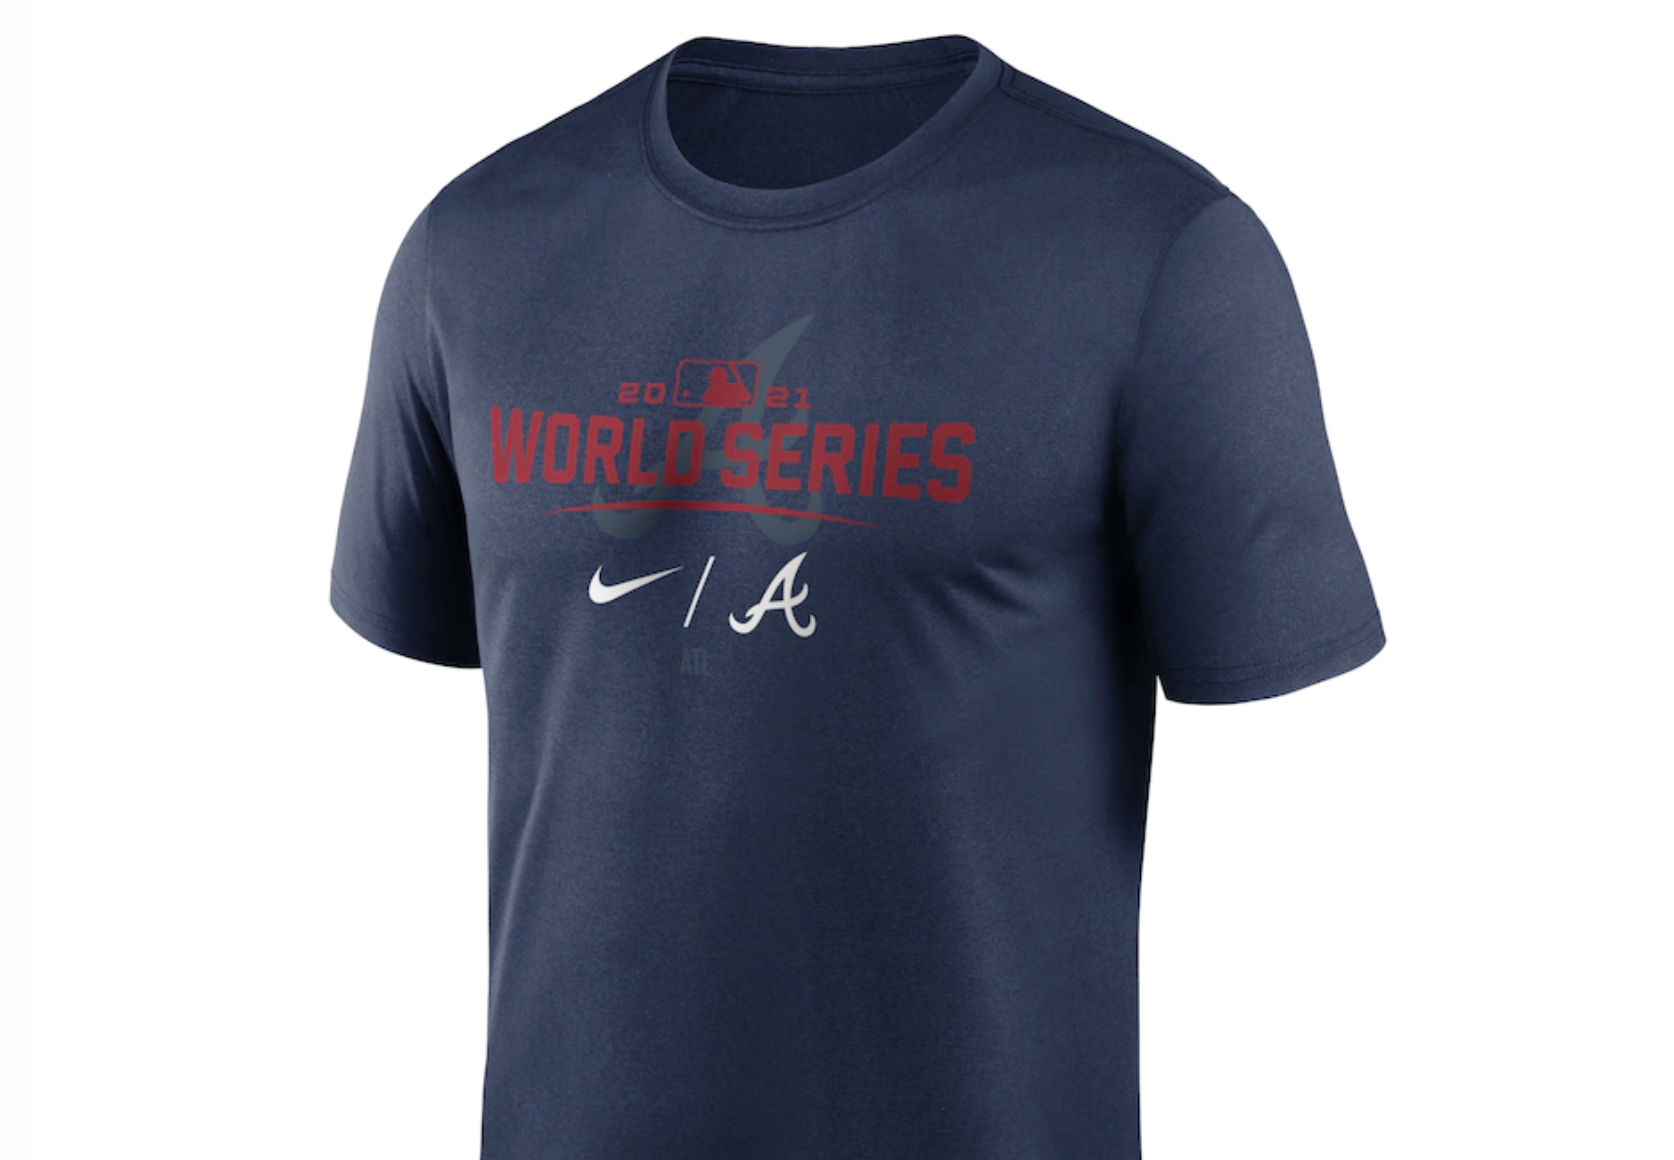 Our 5 favorite pieces of Rays World Series merchandise